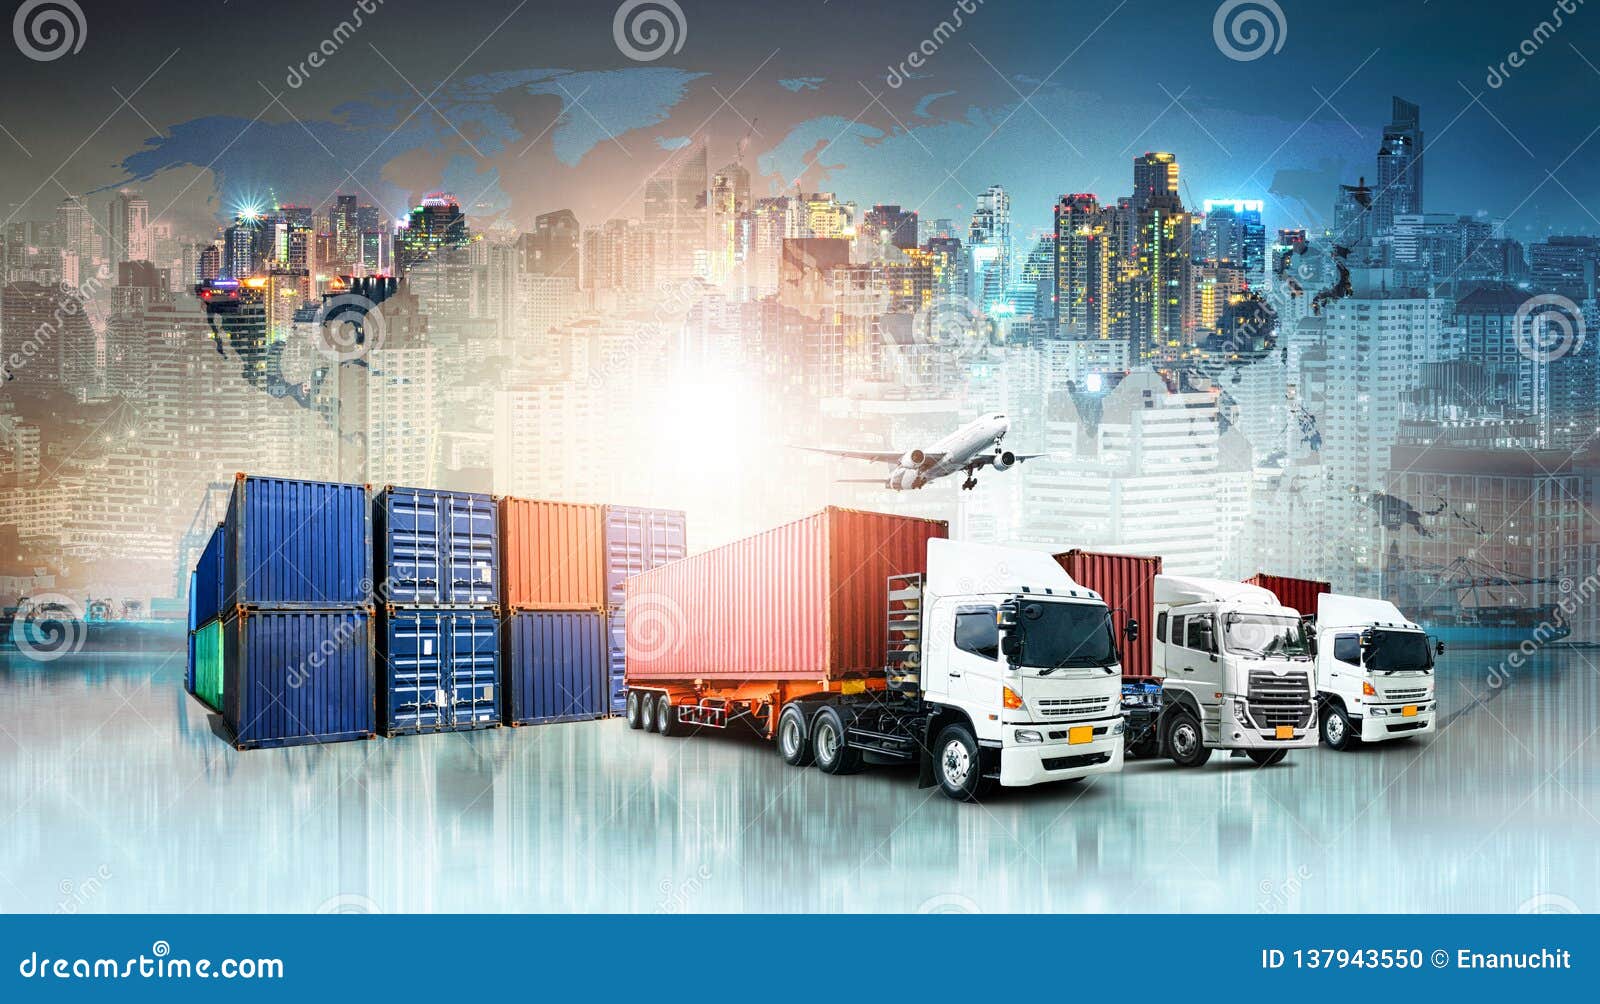 global business logistics import export background and container cargo freight ship